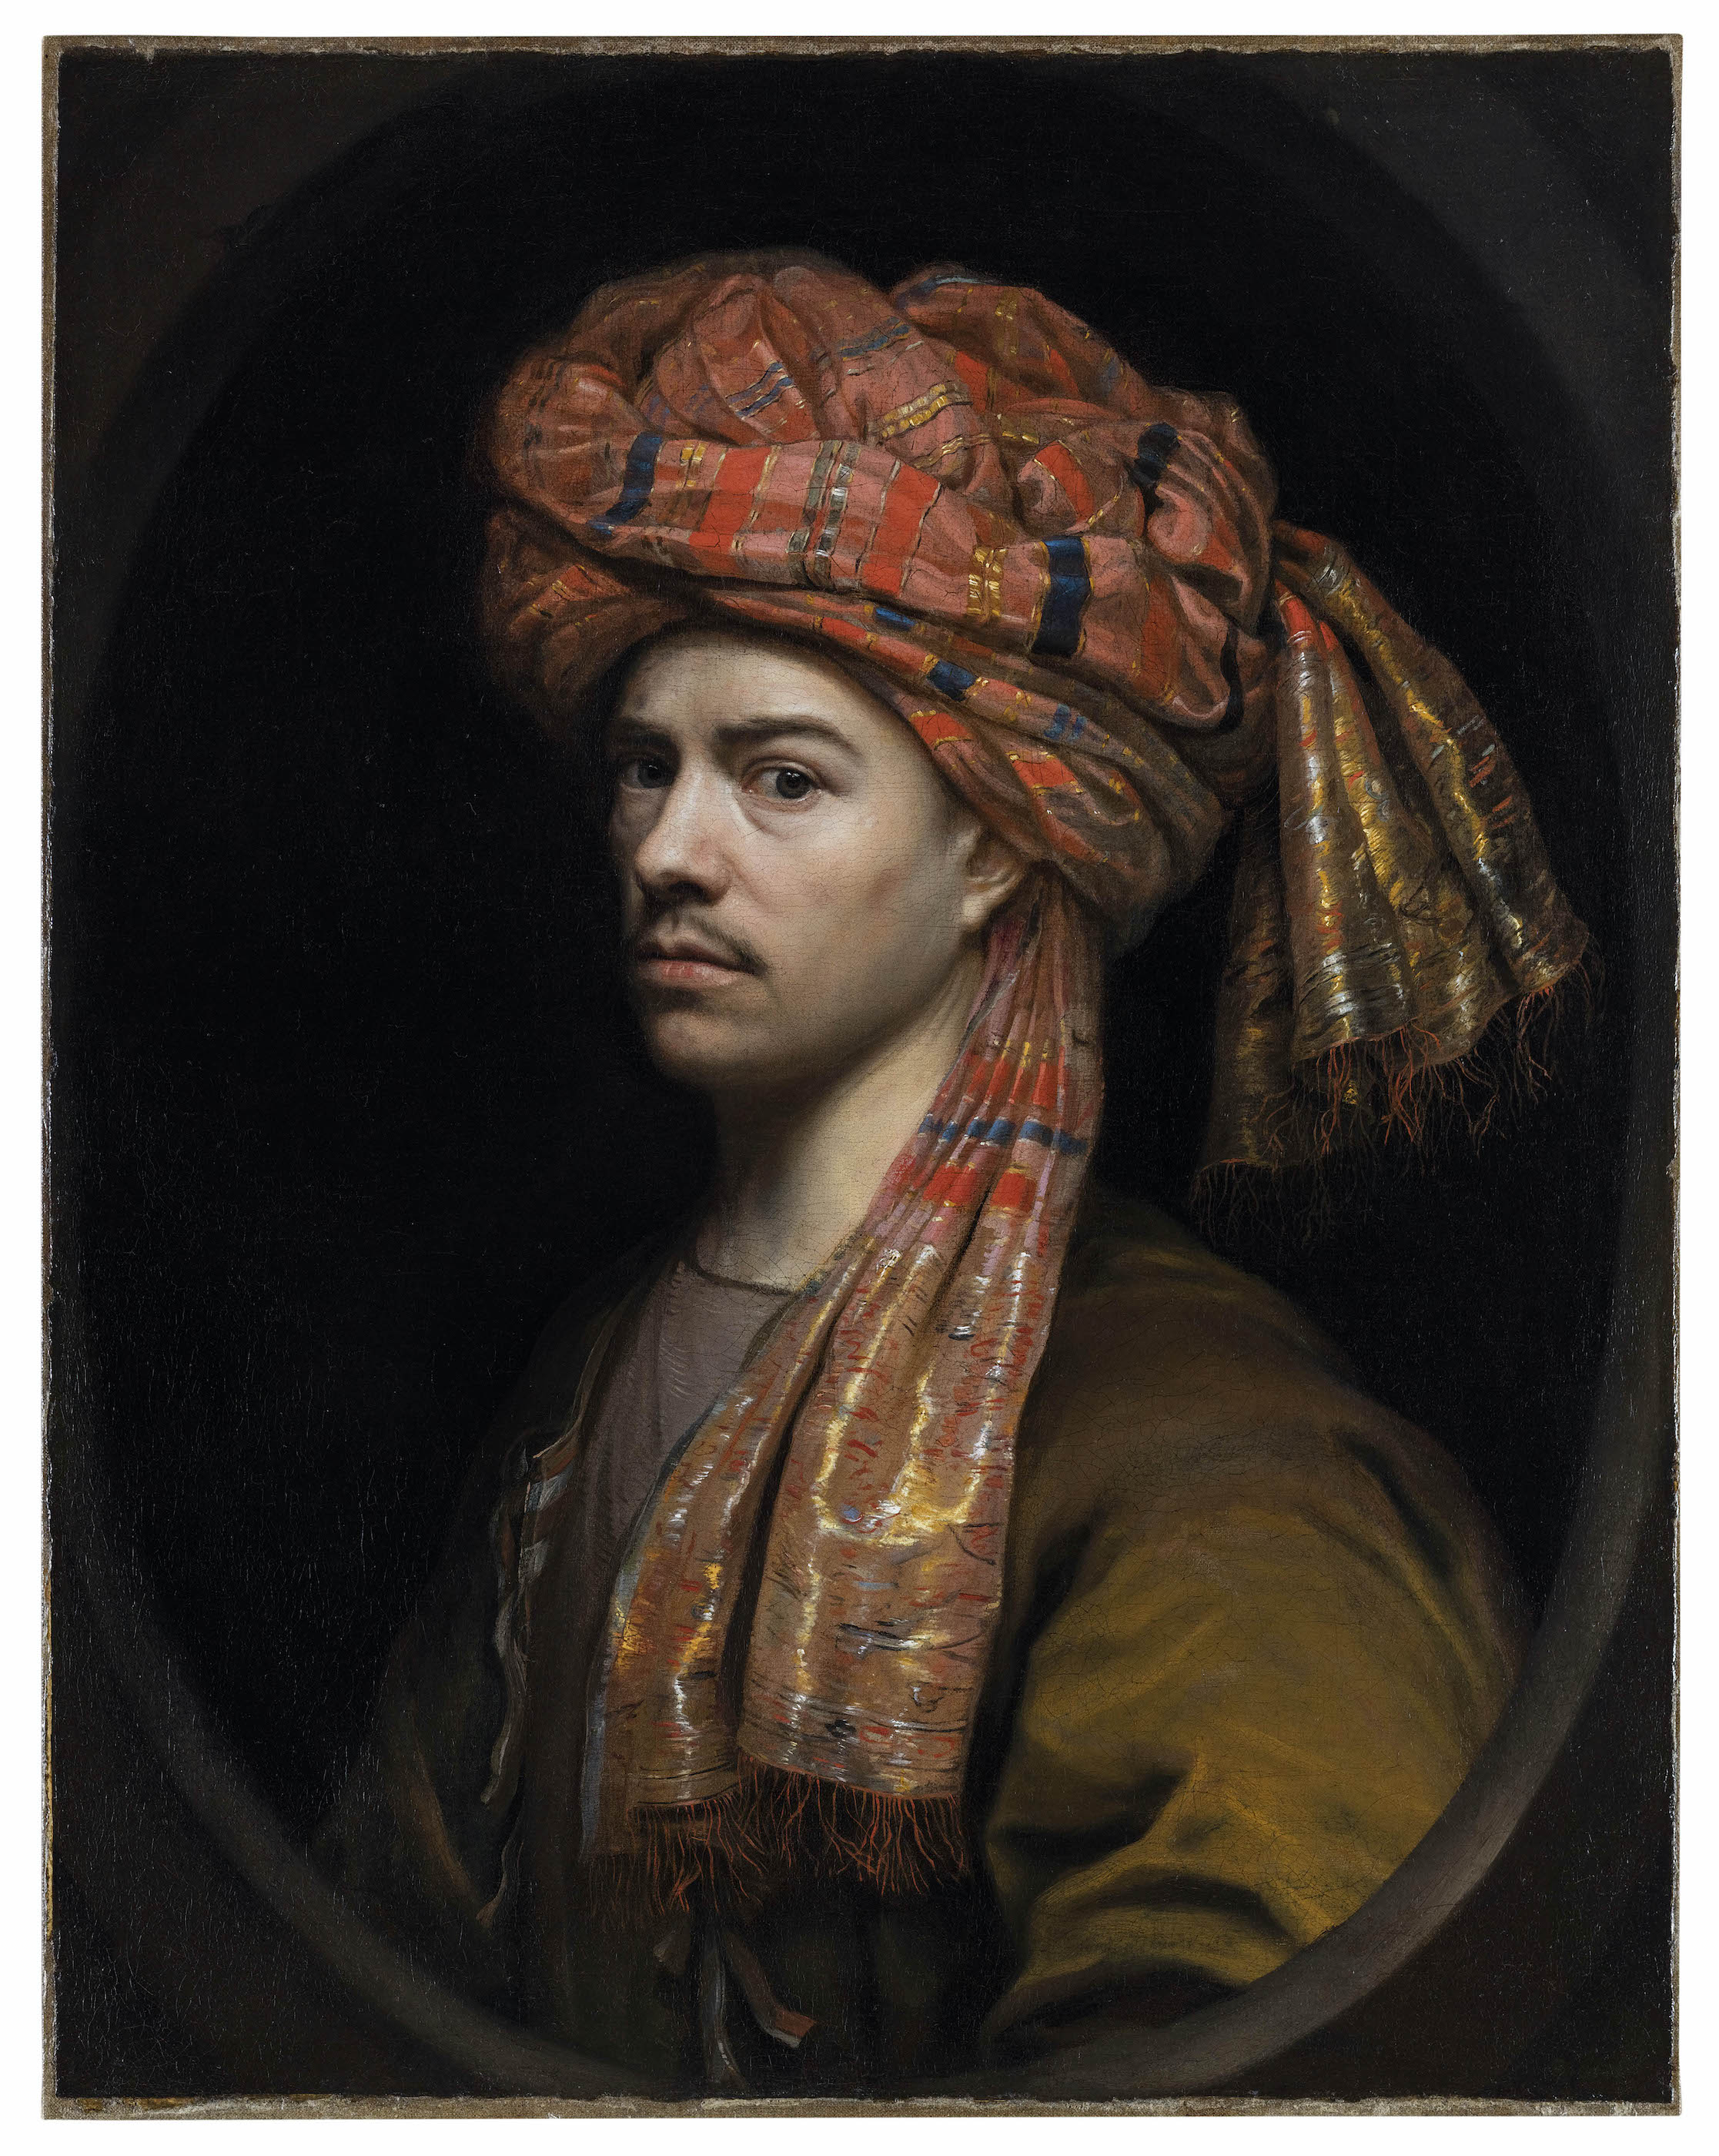 Self-Portrait With a Turban by Wallerant Vaillant - 1650-1660 - 74 x 59,5 cm private collection